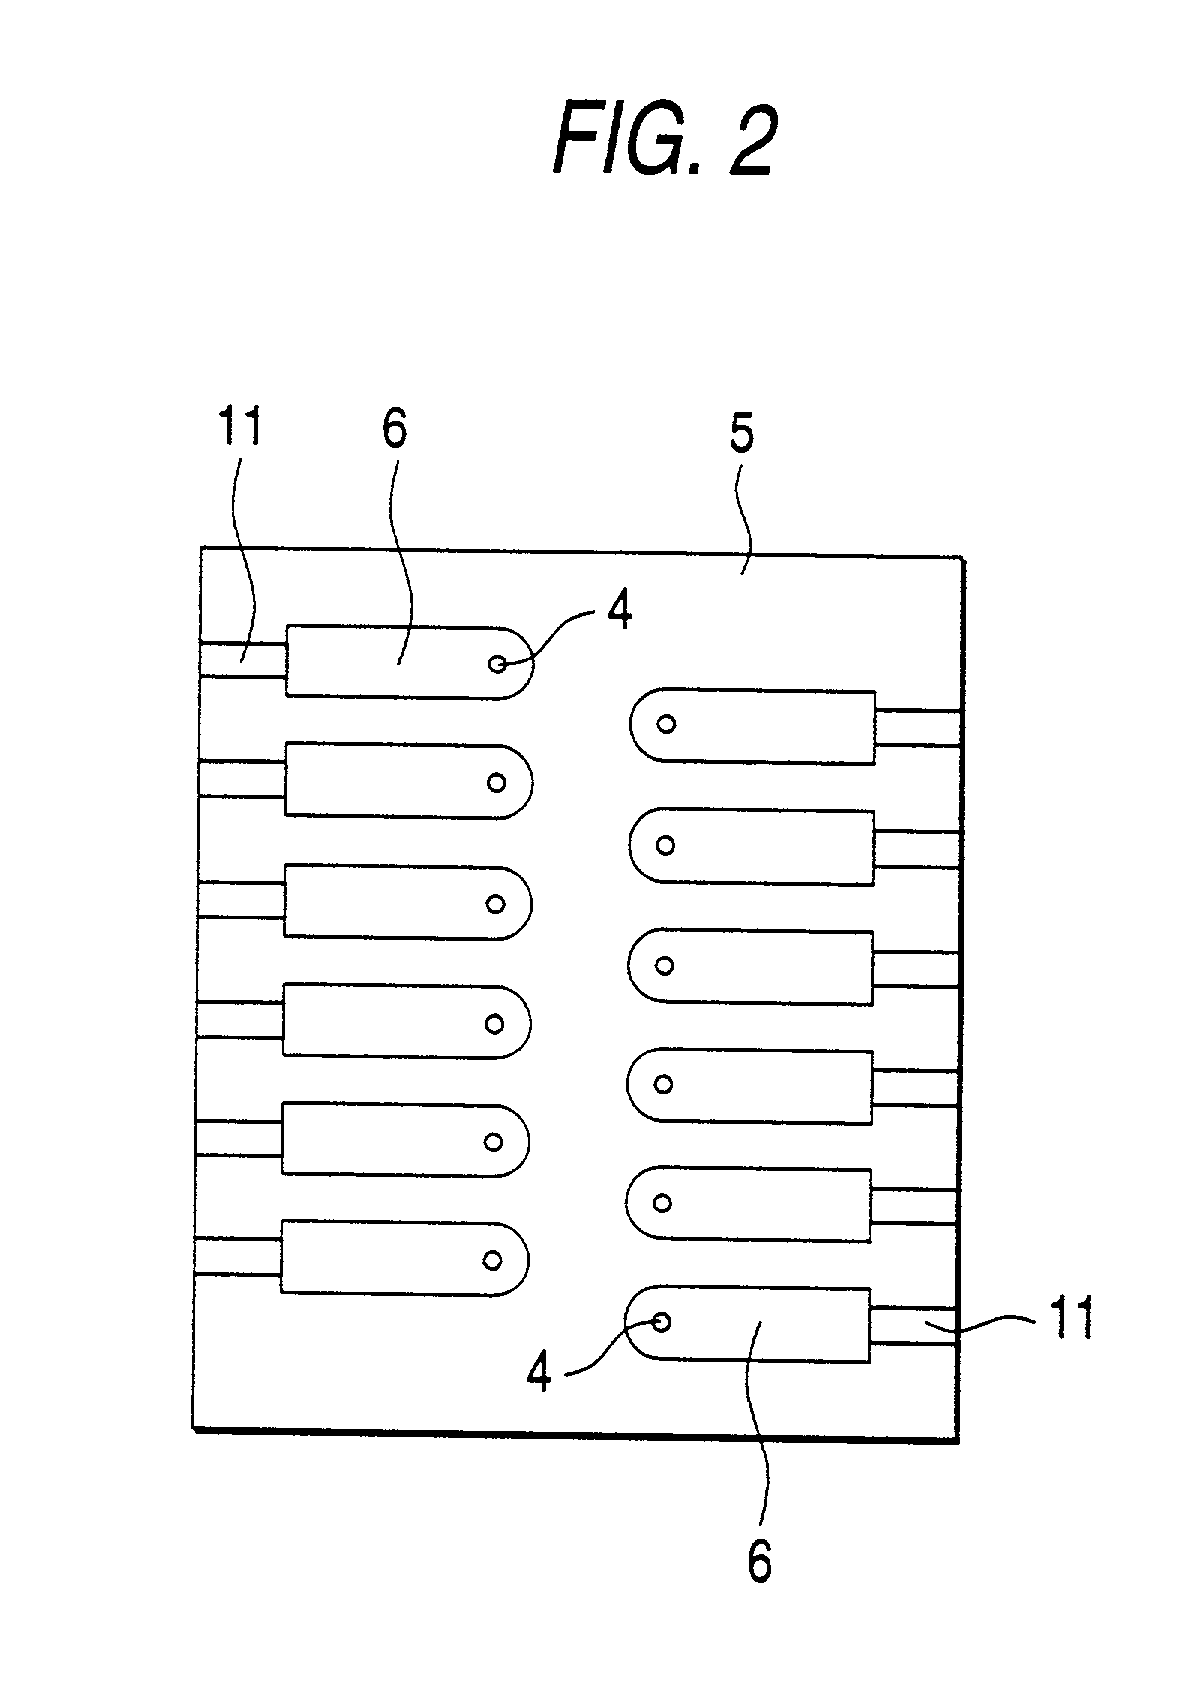 Process for producing a laminated ink-jet recording head